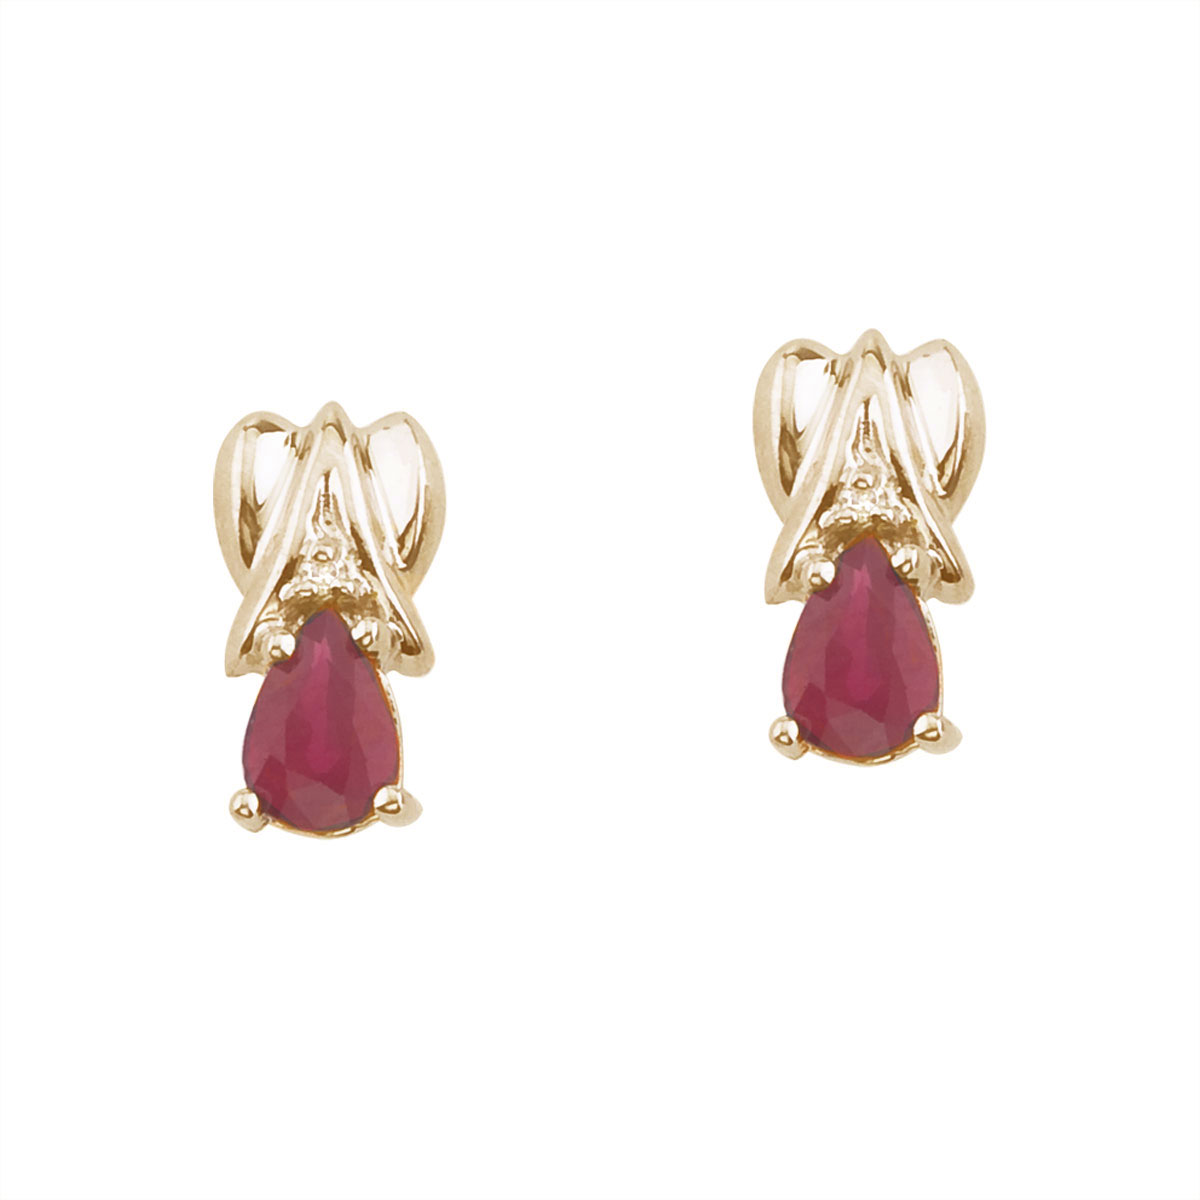 14k yellow gold stud earrings with 6x4 mm pear rubies and bright diamond accents.